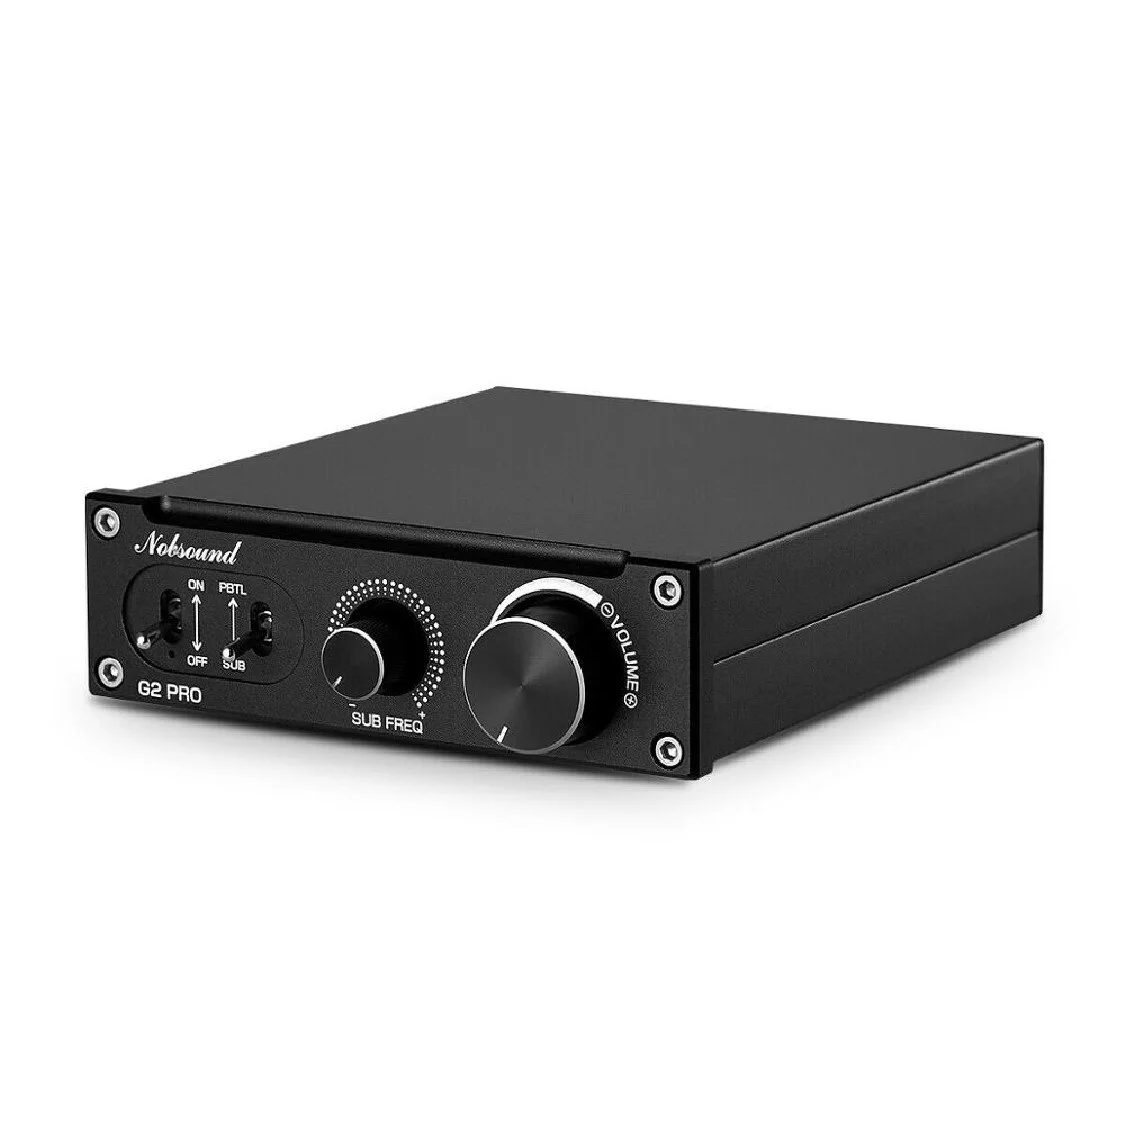 

New Hi-Fi G2 pro Subwoofer / Full-Frequency Mono Channel Digital Power Amplifier 300W for Home Theater Speaker